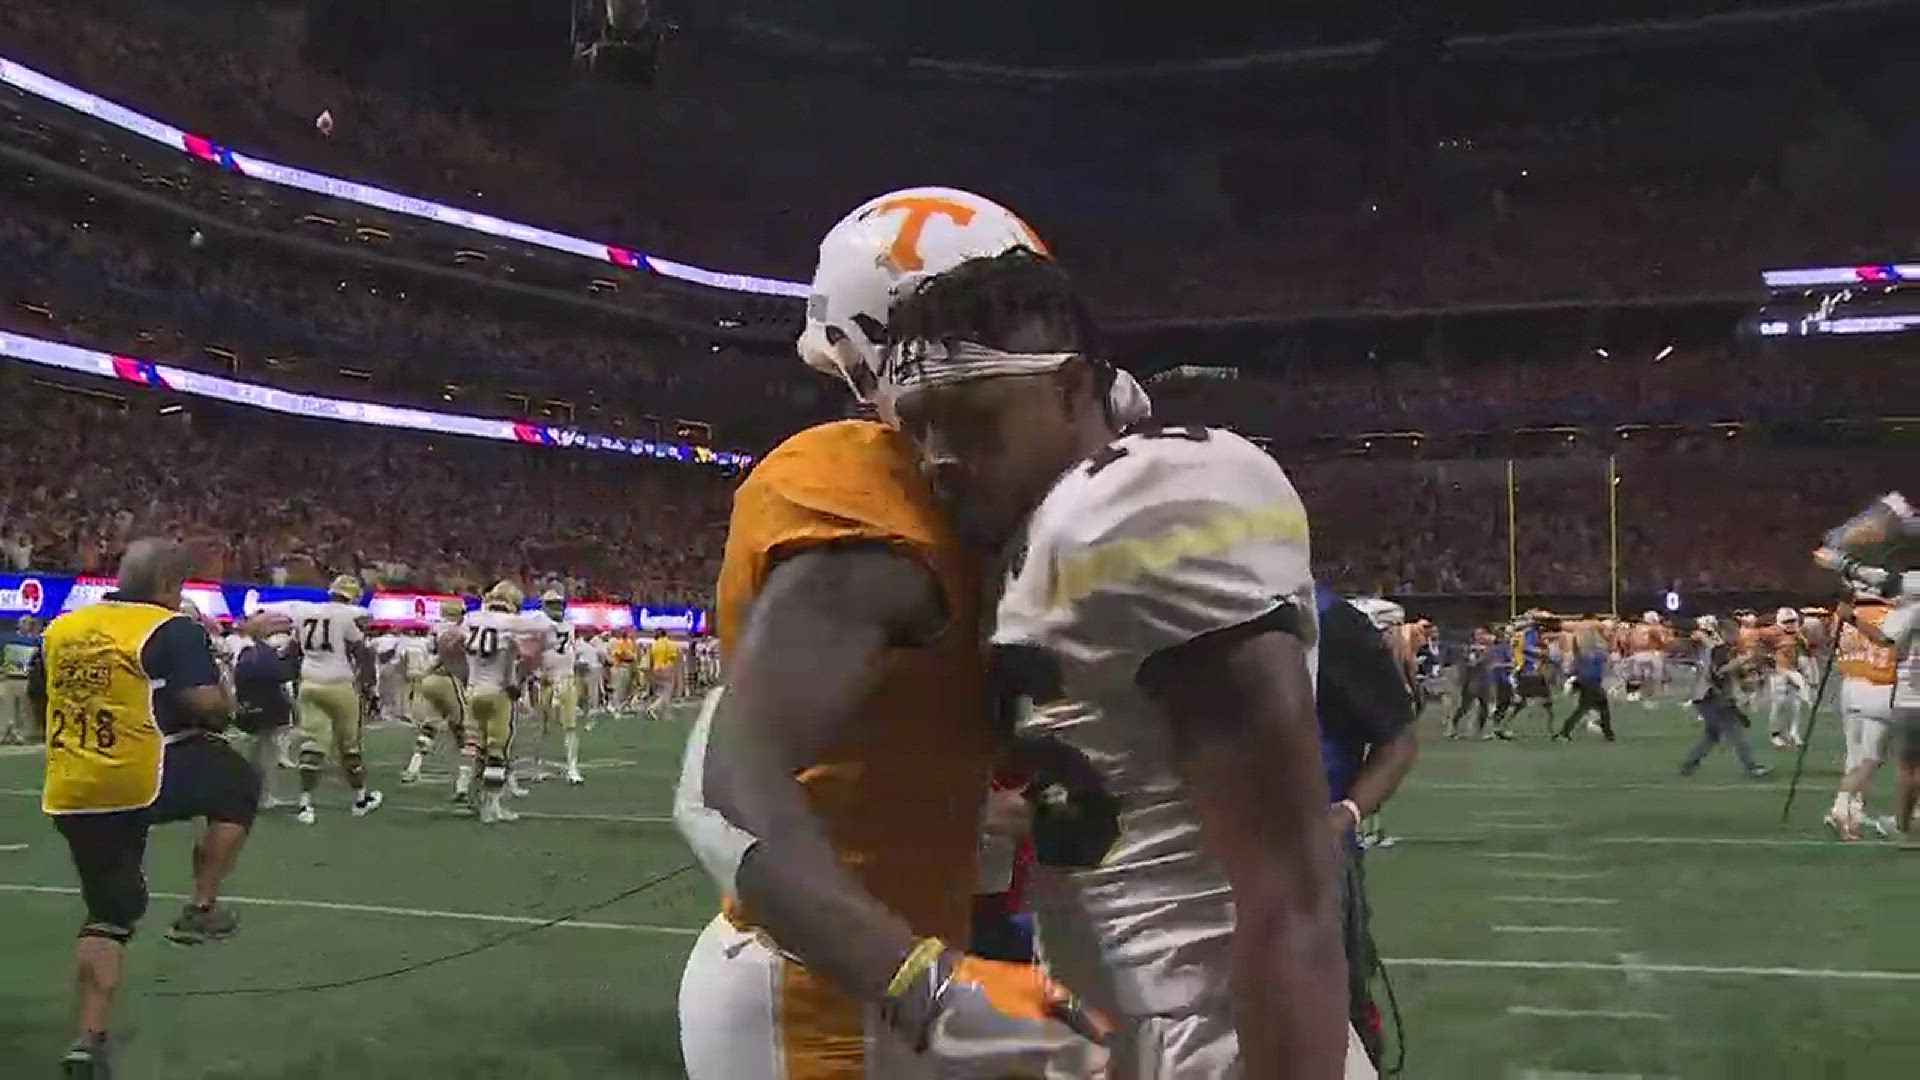 The Vols trailed 28-14 in the fourth quarter but came back to win 42-41 in double overtime.